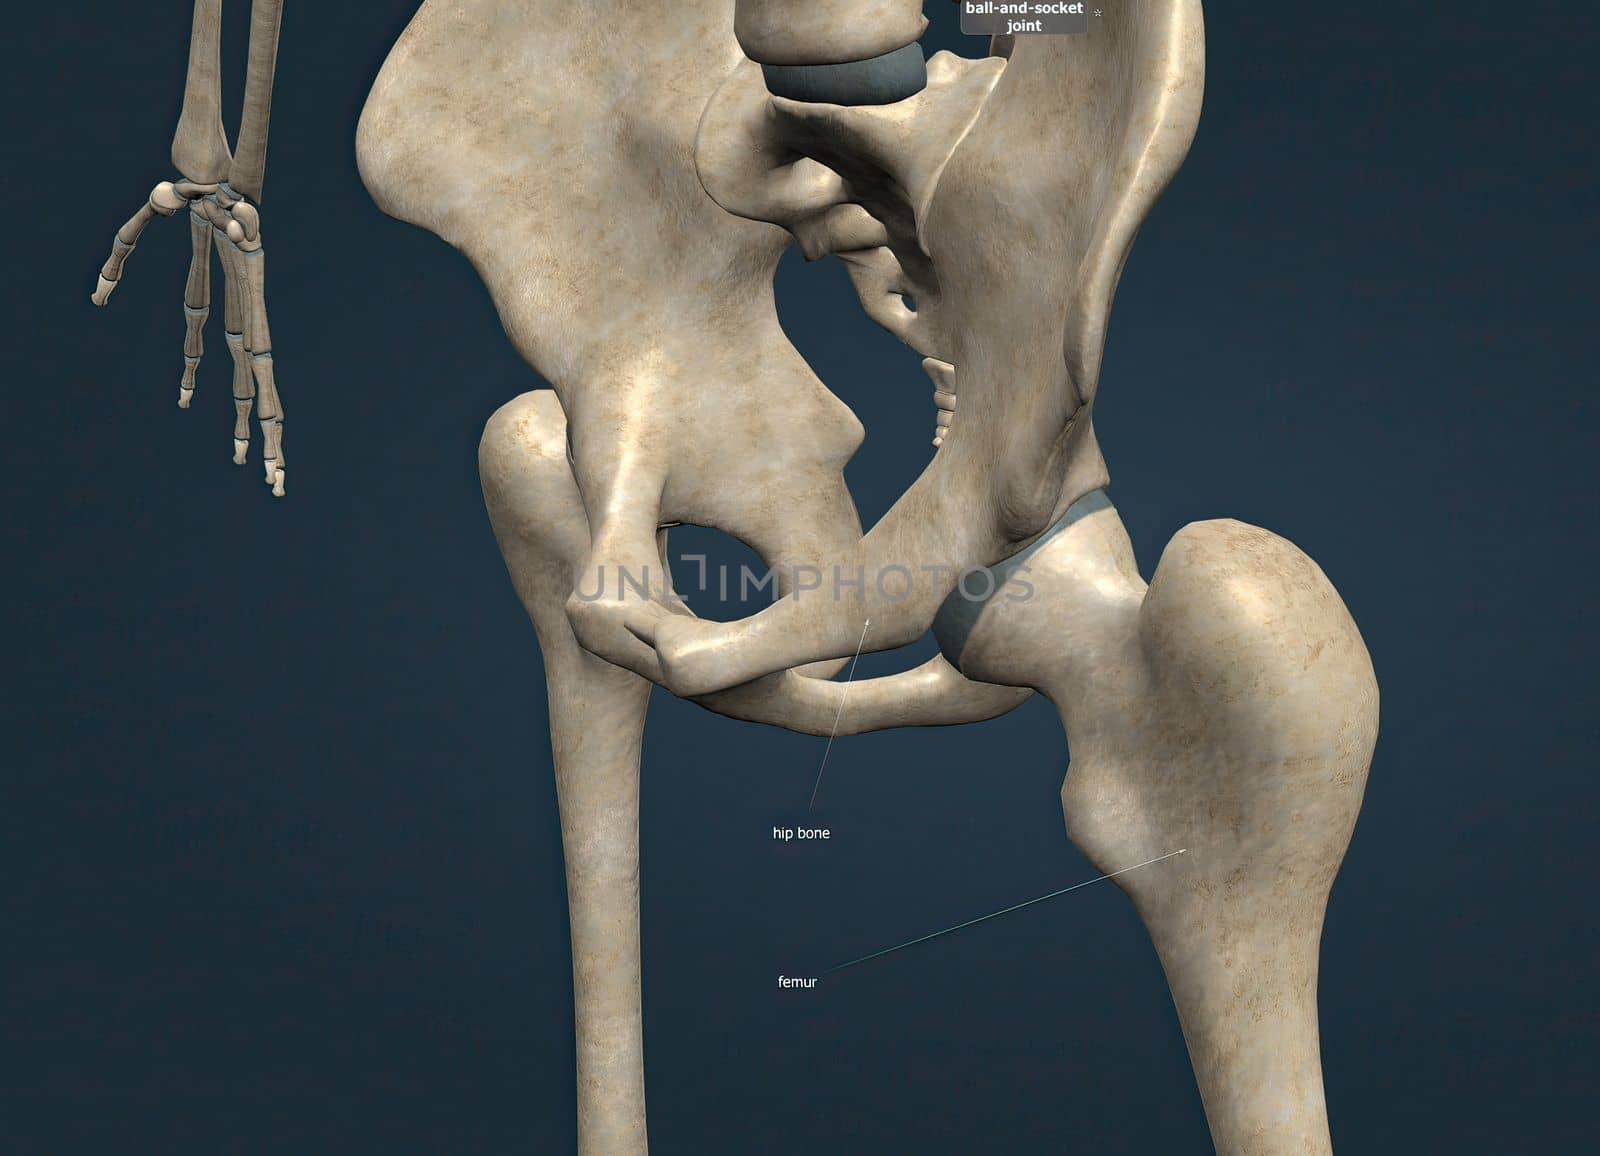 When the hip joint, thighbone and hip bone come together, they form one of the most important joints in the Human body. 3d illustration